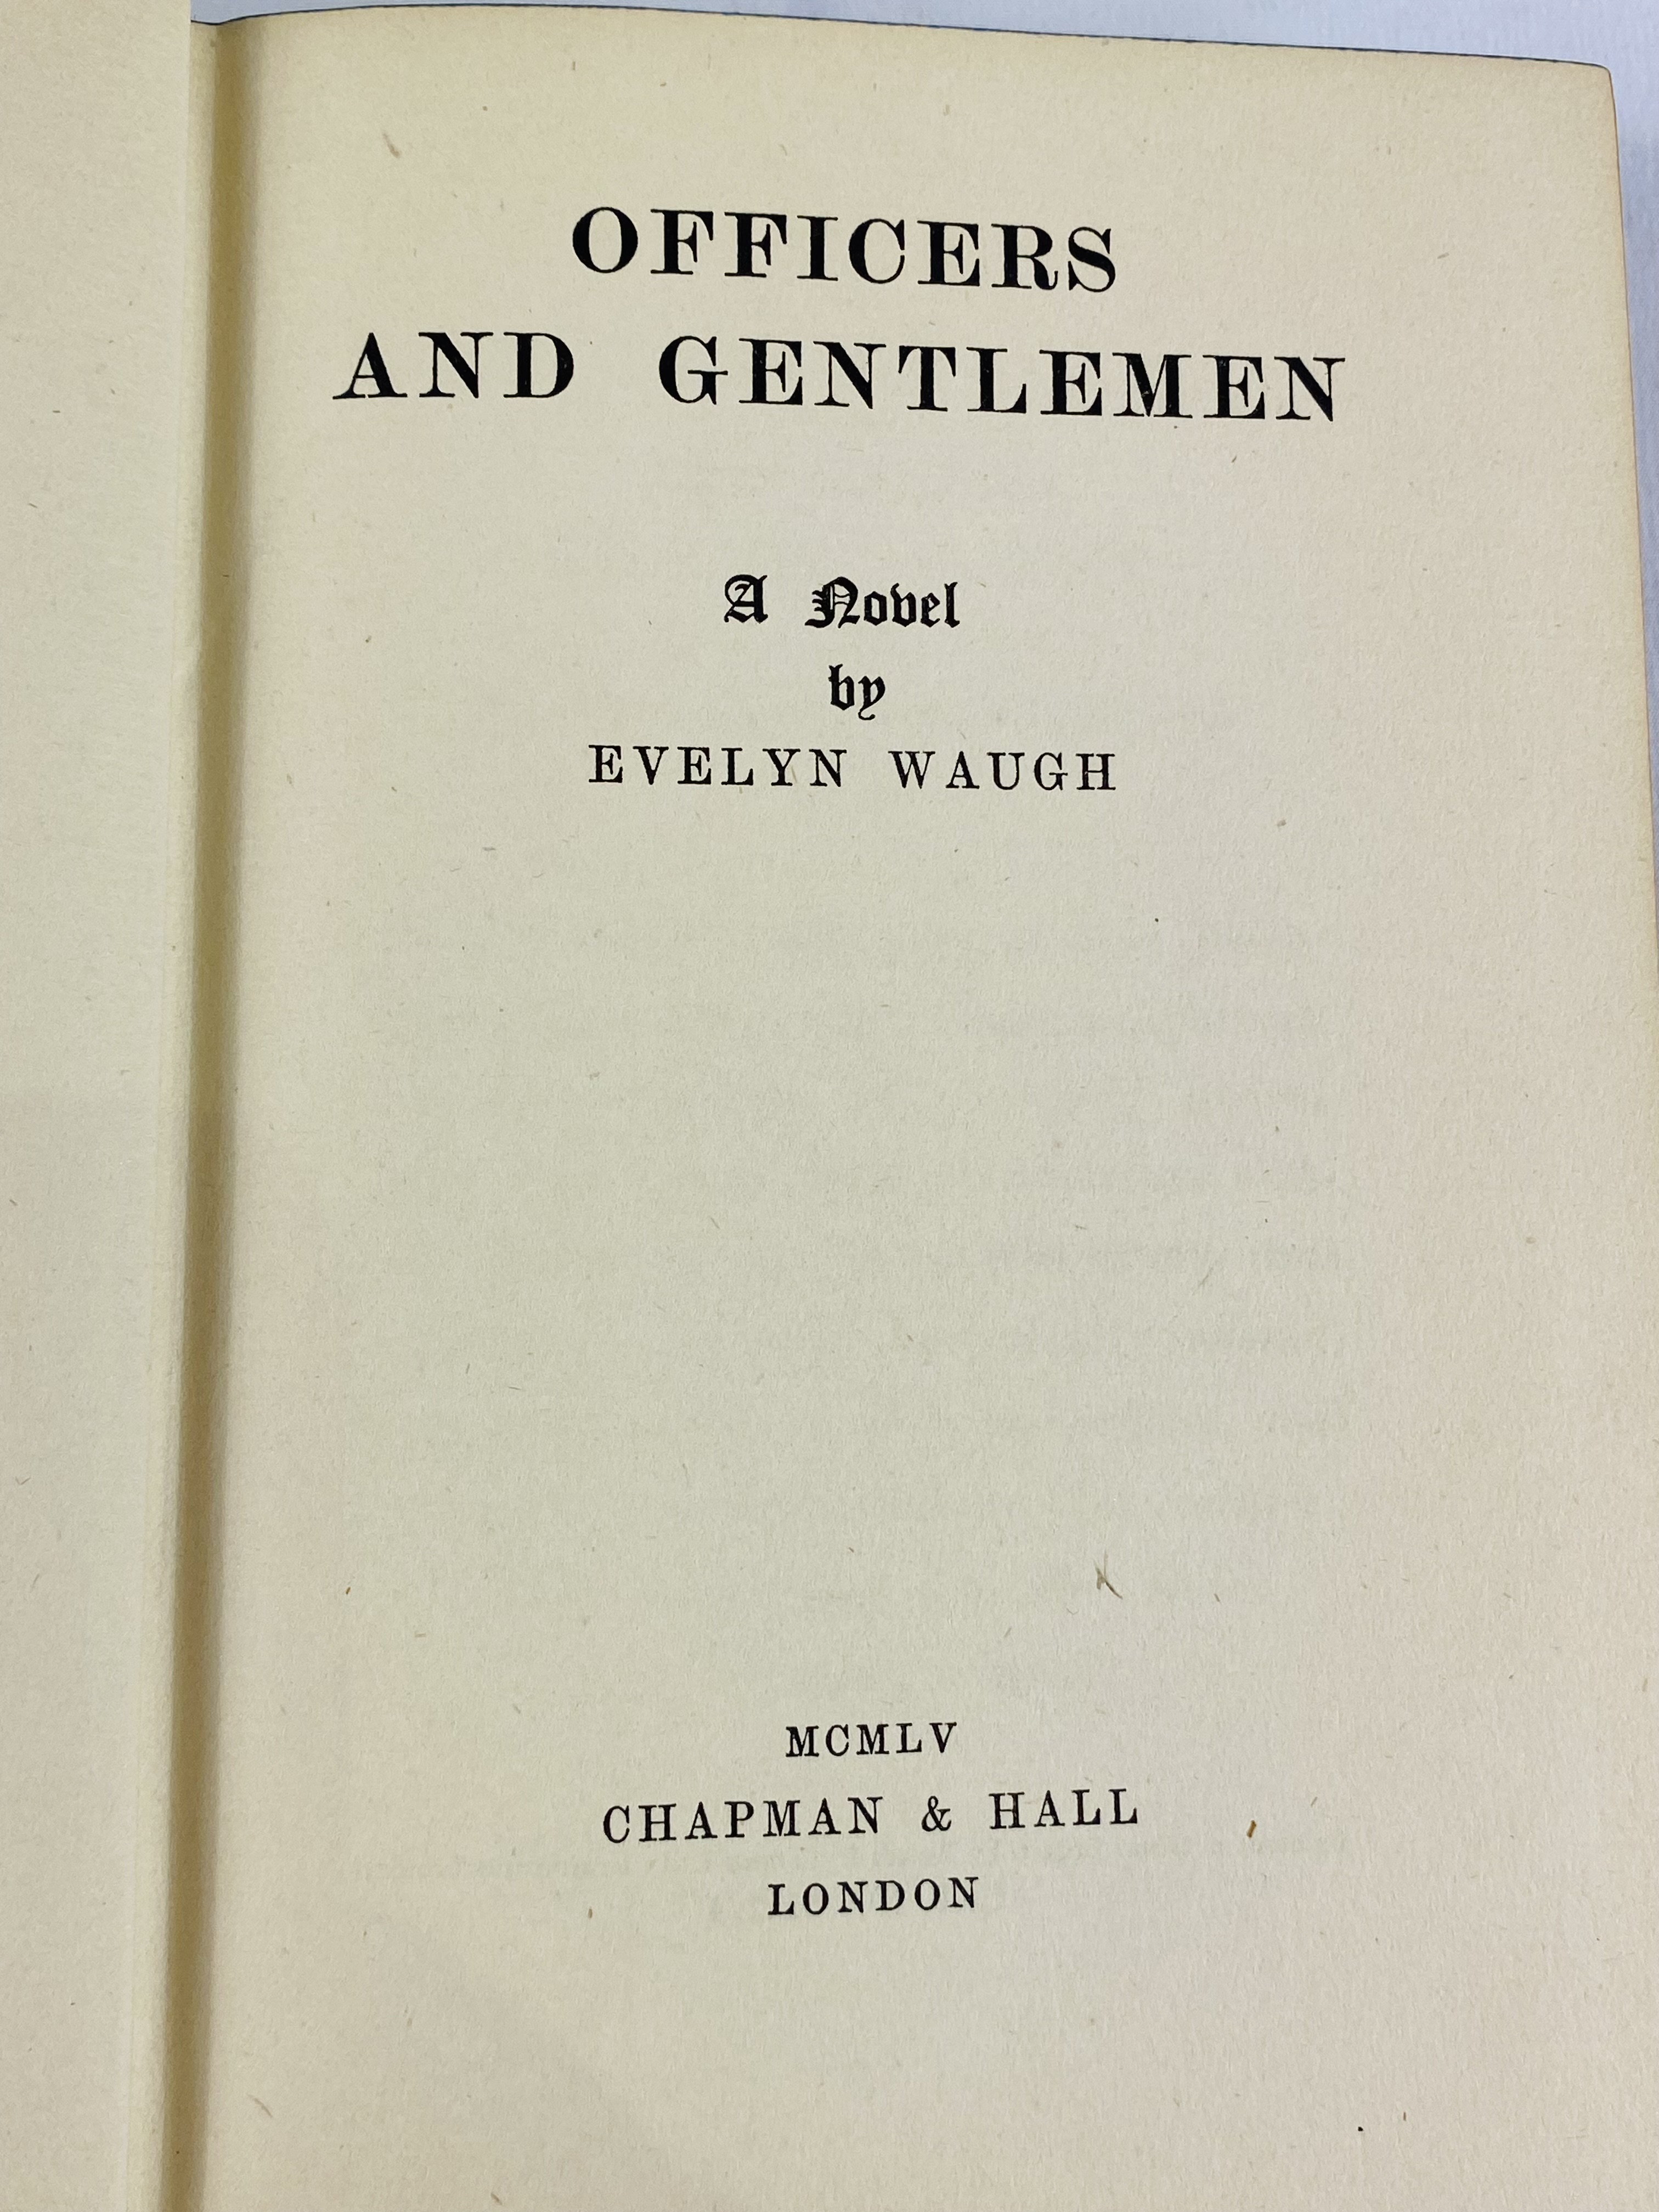 Office and Gentleman by Evelyn Waugh and other books - Image 2 of 3